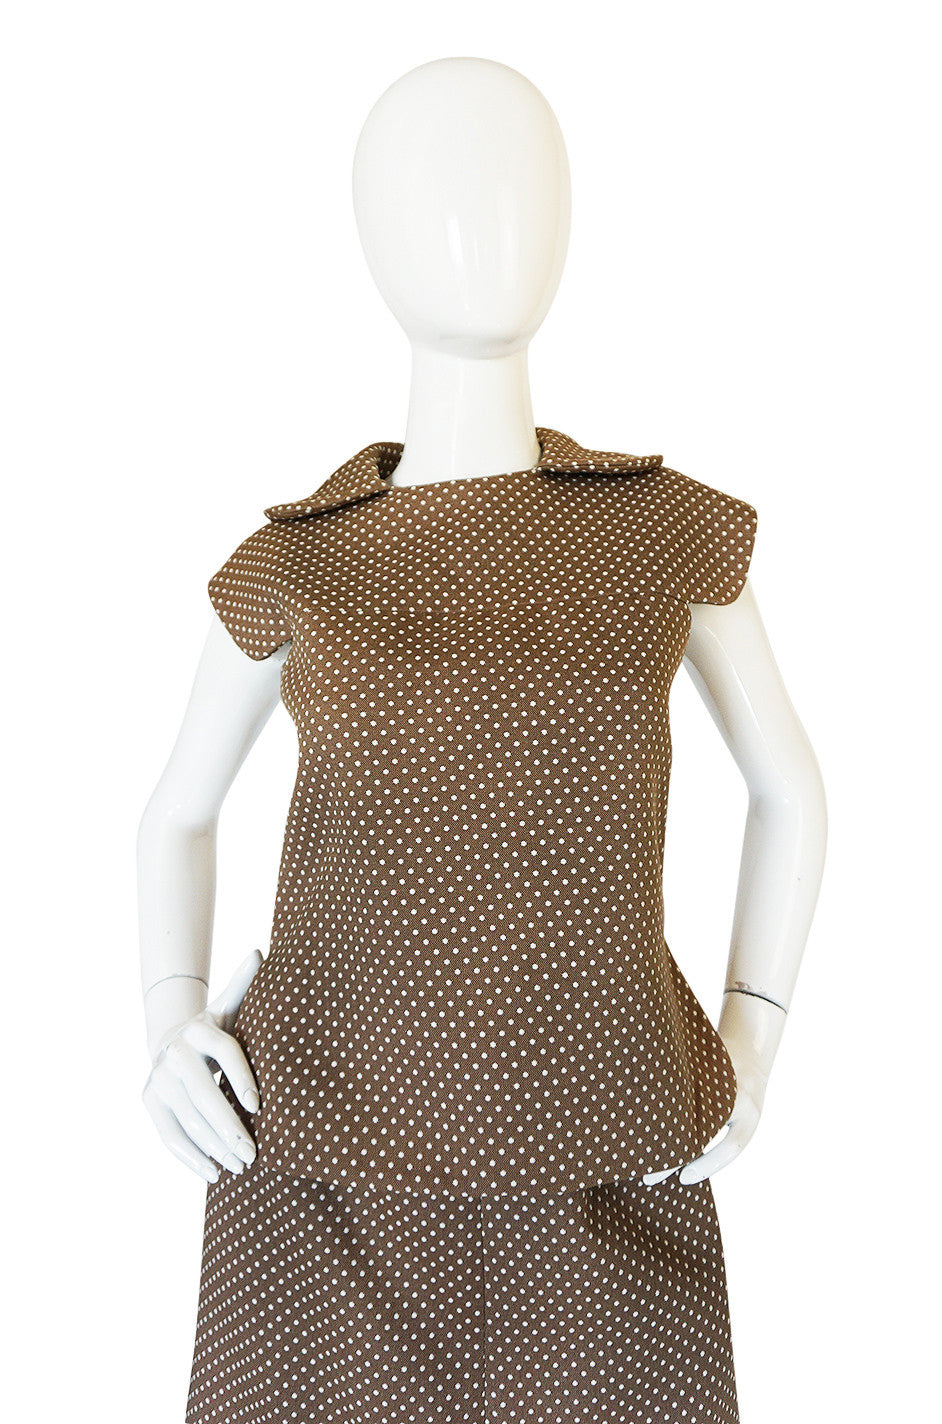 Darling 1960s Dotted Pierre Cardin Top and Skirt Set – Shrimpton Couture